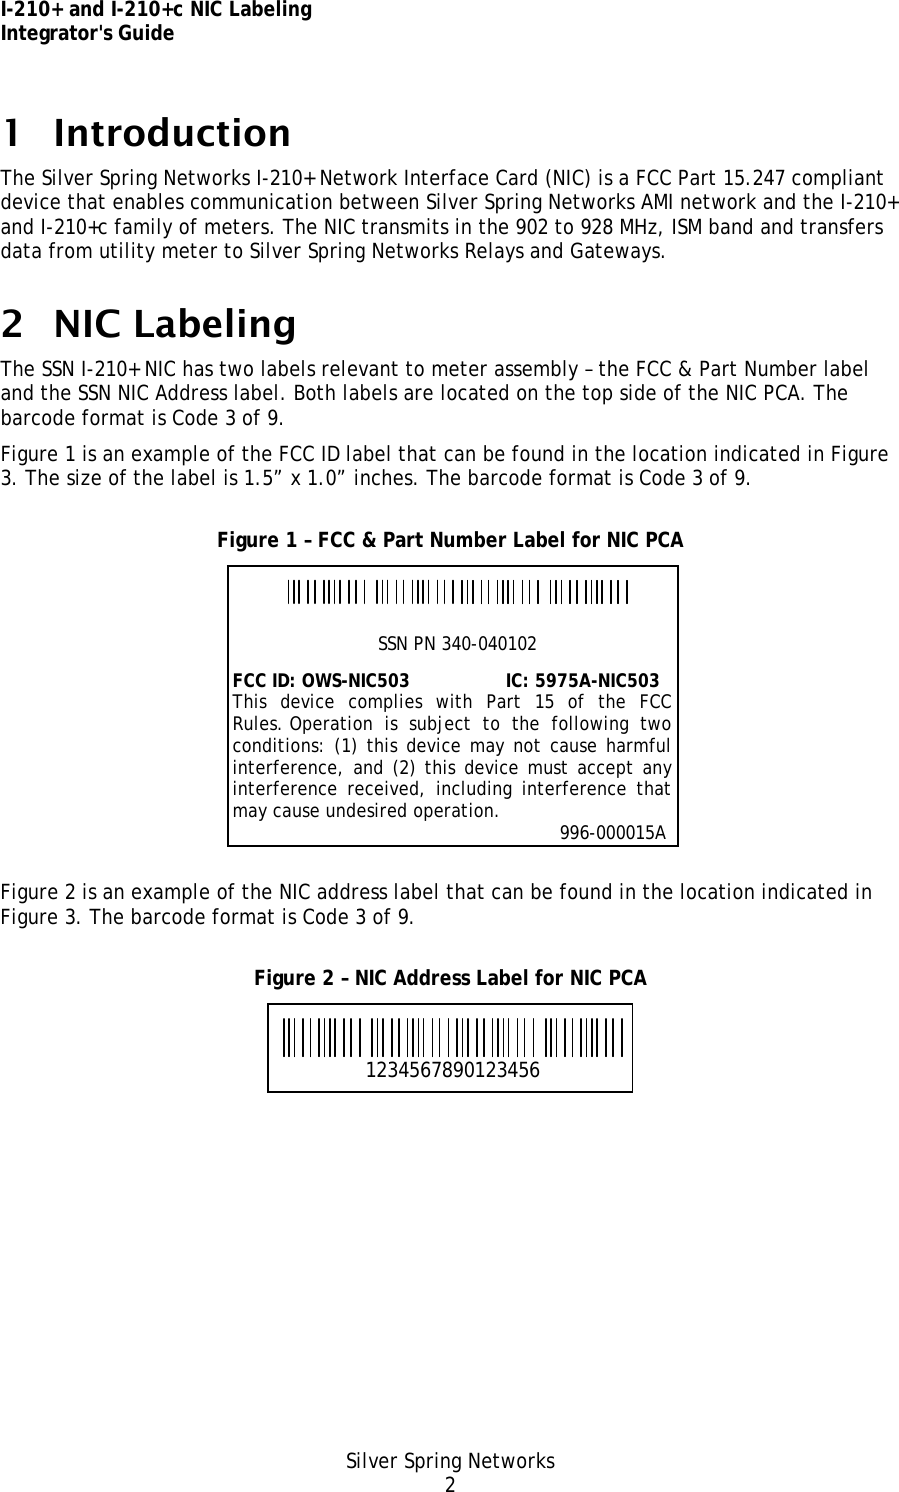 I-210+ and I-210+c NIC Labeling Integrator&apos;s Guide Silver Spring Networks 2 1 Introduction The Silver Spring Networks I-210+ Network Interface Card (NIC) is a FCC Part 15.247 compliant device that enables communication between Silver Spring Networks AMI network and the I-210+ and I-210+c family of meters. The NIC transmits in the 902 to 928 MHz, ISM band and transfers data from utility meter to Silver Spring Networks Relays and Gateways. 2 NIC Labeling The SSN I-210+ NIC has two labels relevant to meter assembly – the FCC &amp; Part Number label and the SSN NIC Address label. Both labels are located on the top side of the NIC PCA. The barcode format is Code 3 of 9. Figure 1 is an example of the FCC ID label that can be found in the location indicated in Figure 3. The size of the label is 1.5” x 1.0” inches. The barcode format is Code 3 of 9. Figure 1 – FCC &amp; Part Number Label for NIC PCA  Figure 2 is an example of the NIC address label that can be found in the location indicated in Figure 3. The barcode format is Code 3 of 9. Figure 2 – NIC Address Label for NIC PCA  1234567890123456  SSN PN 340-040102 FCC ID: OWS-NIC503                 IC: 5975A-NIC503This device complies with Part 15 of the FCCRules. Operation is subject to the following twoconditions: (1) this device may not cause harmfulinterference, and (2) this device must accept anyinterference received, including interference thatmay cause undesired operation.                                                                      996-000015A 